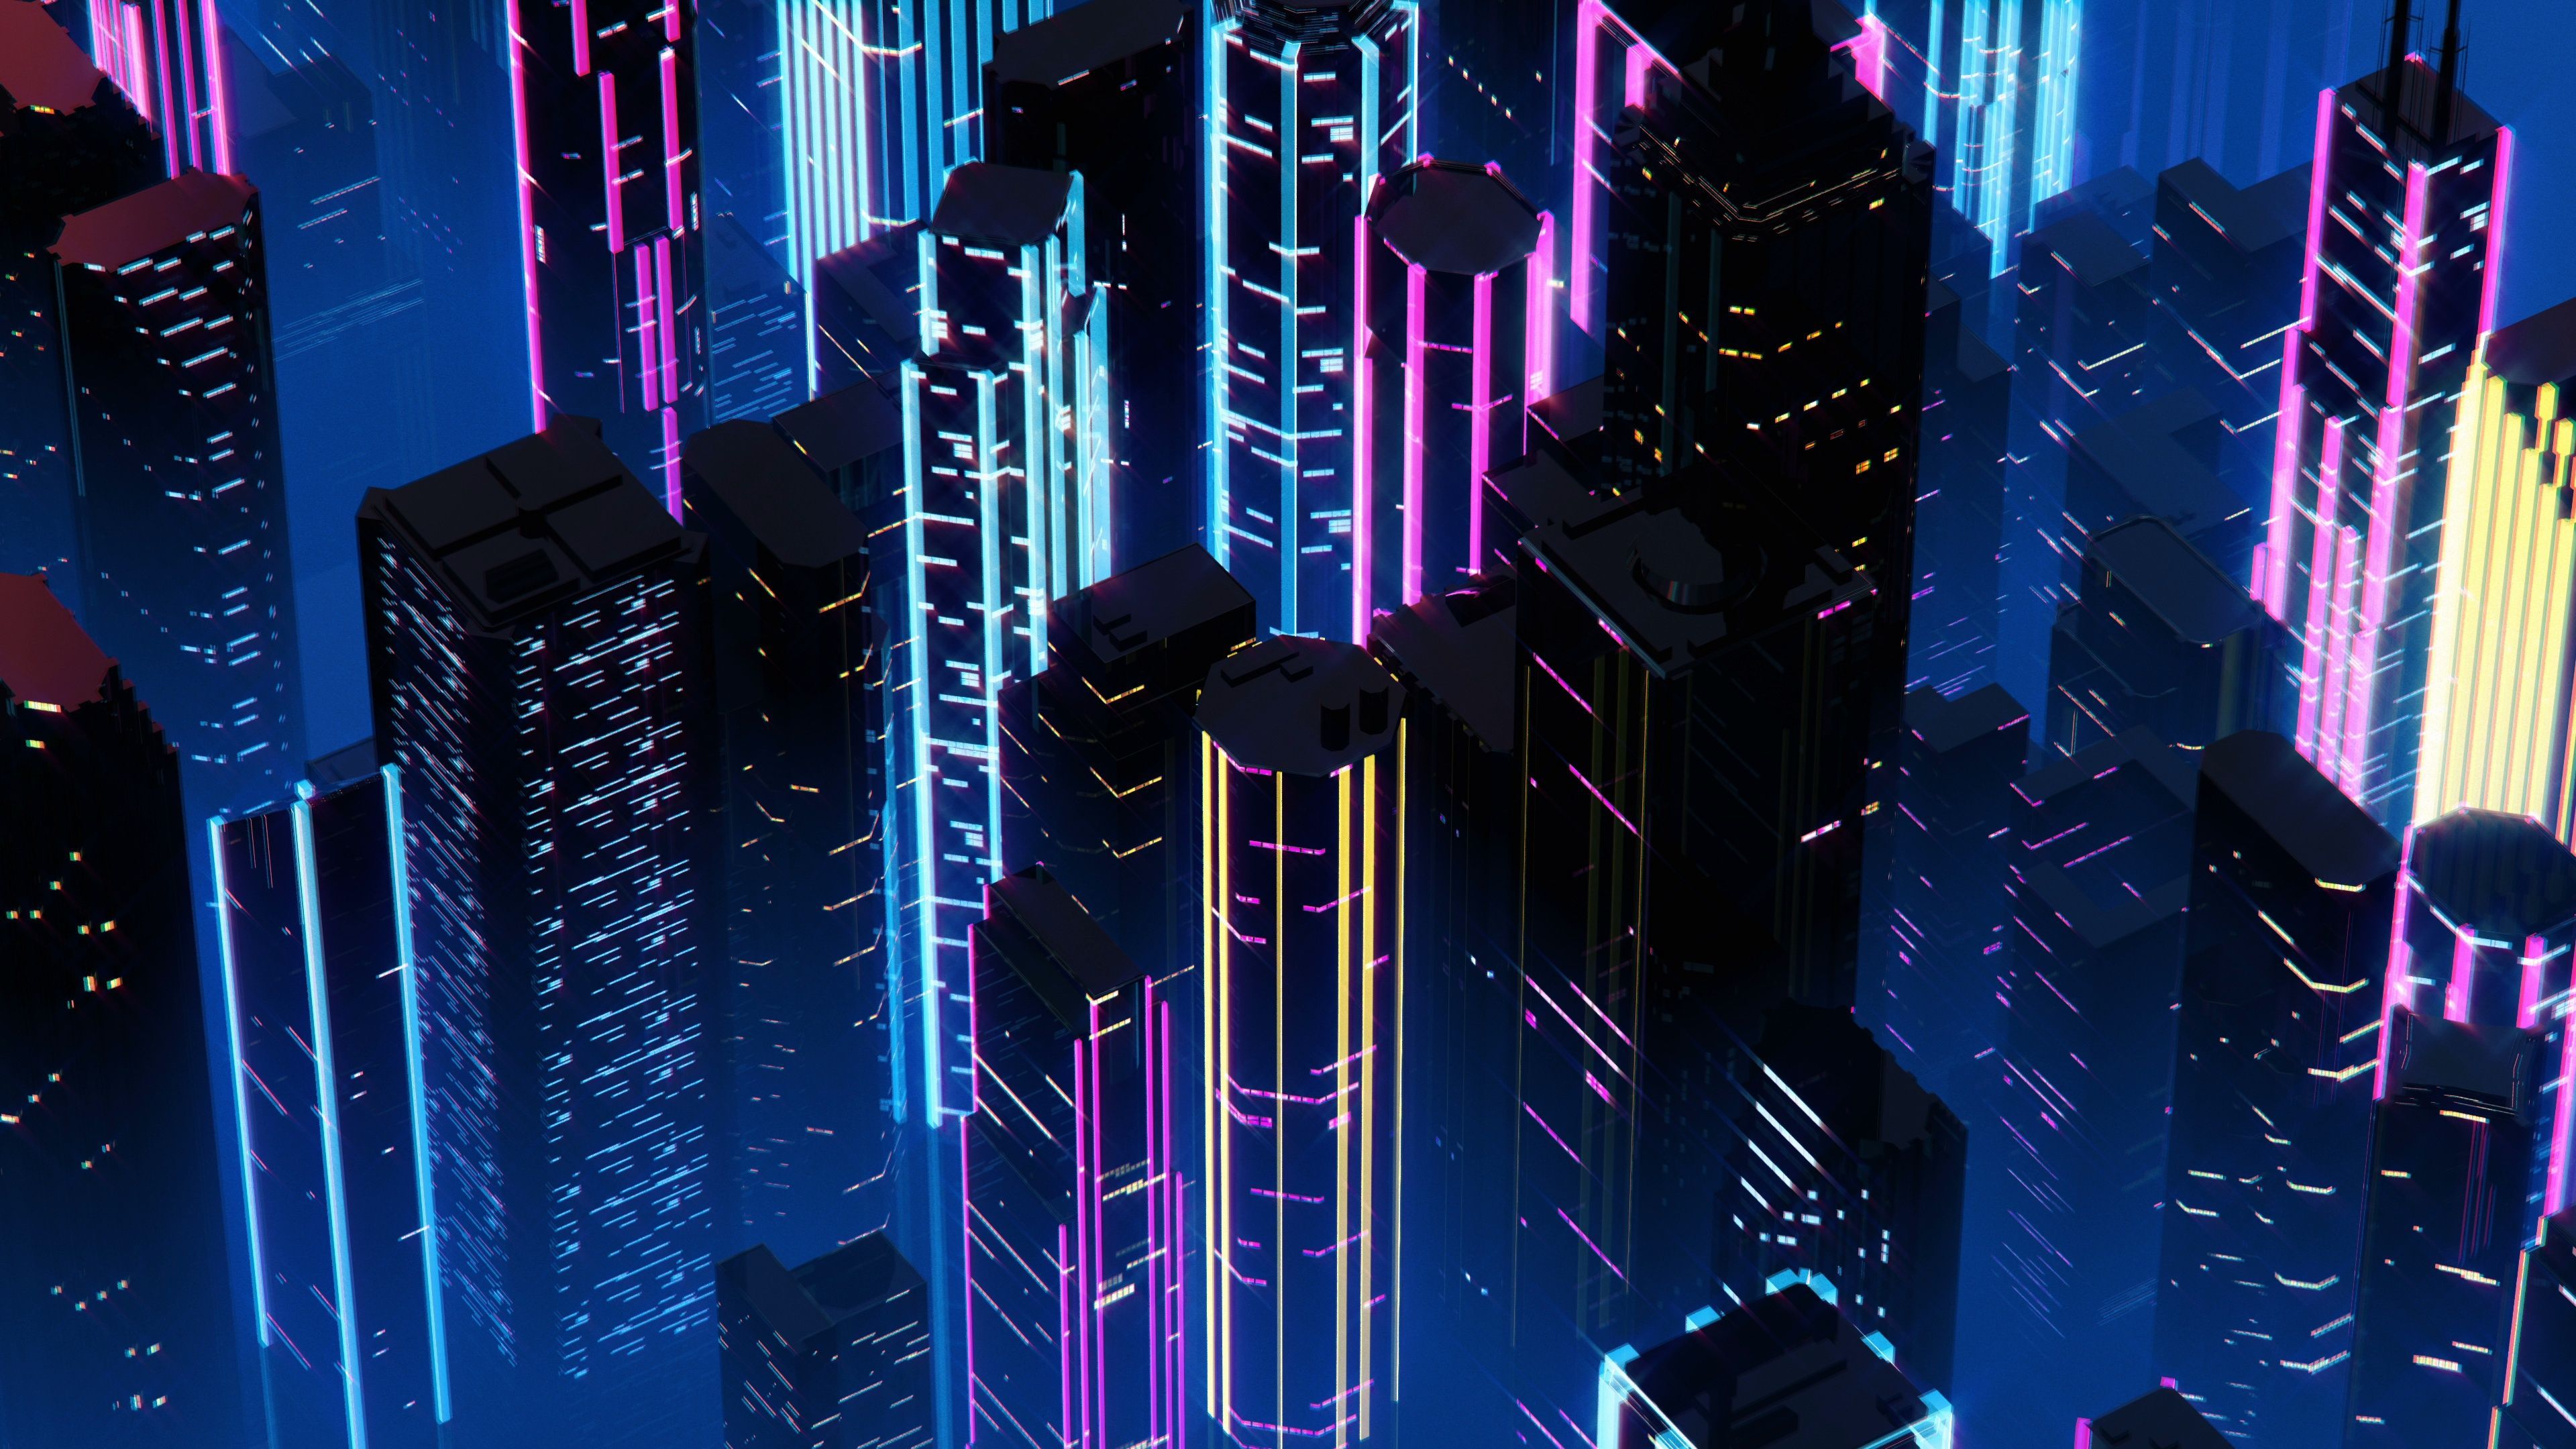 Skyscrapers with neon lights in night city, synthwave style 3D animation Stock Footage #AD , #night#city#lights#Skyscrape. Neon wallpaper, Neon art, City wallpaper